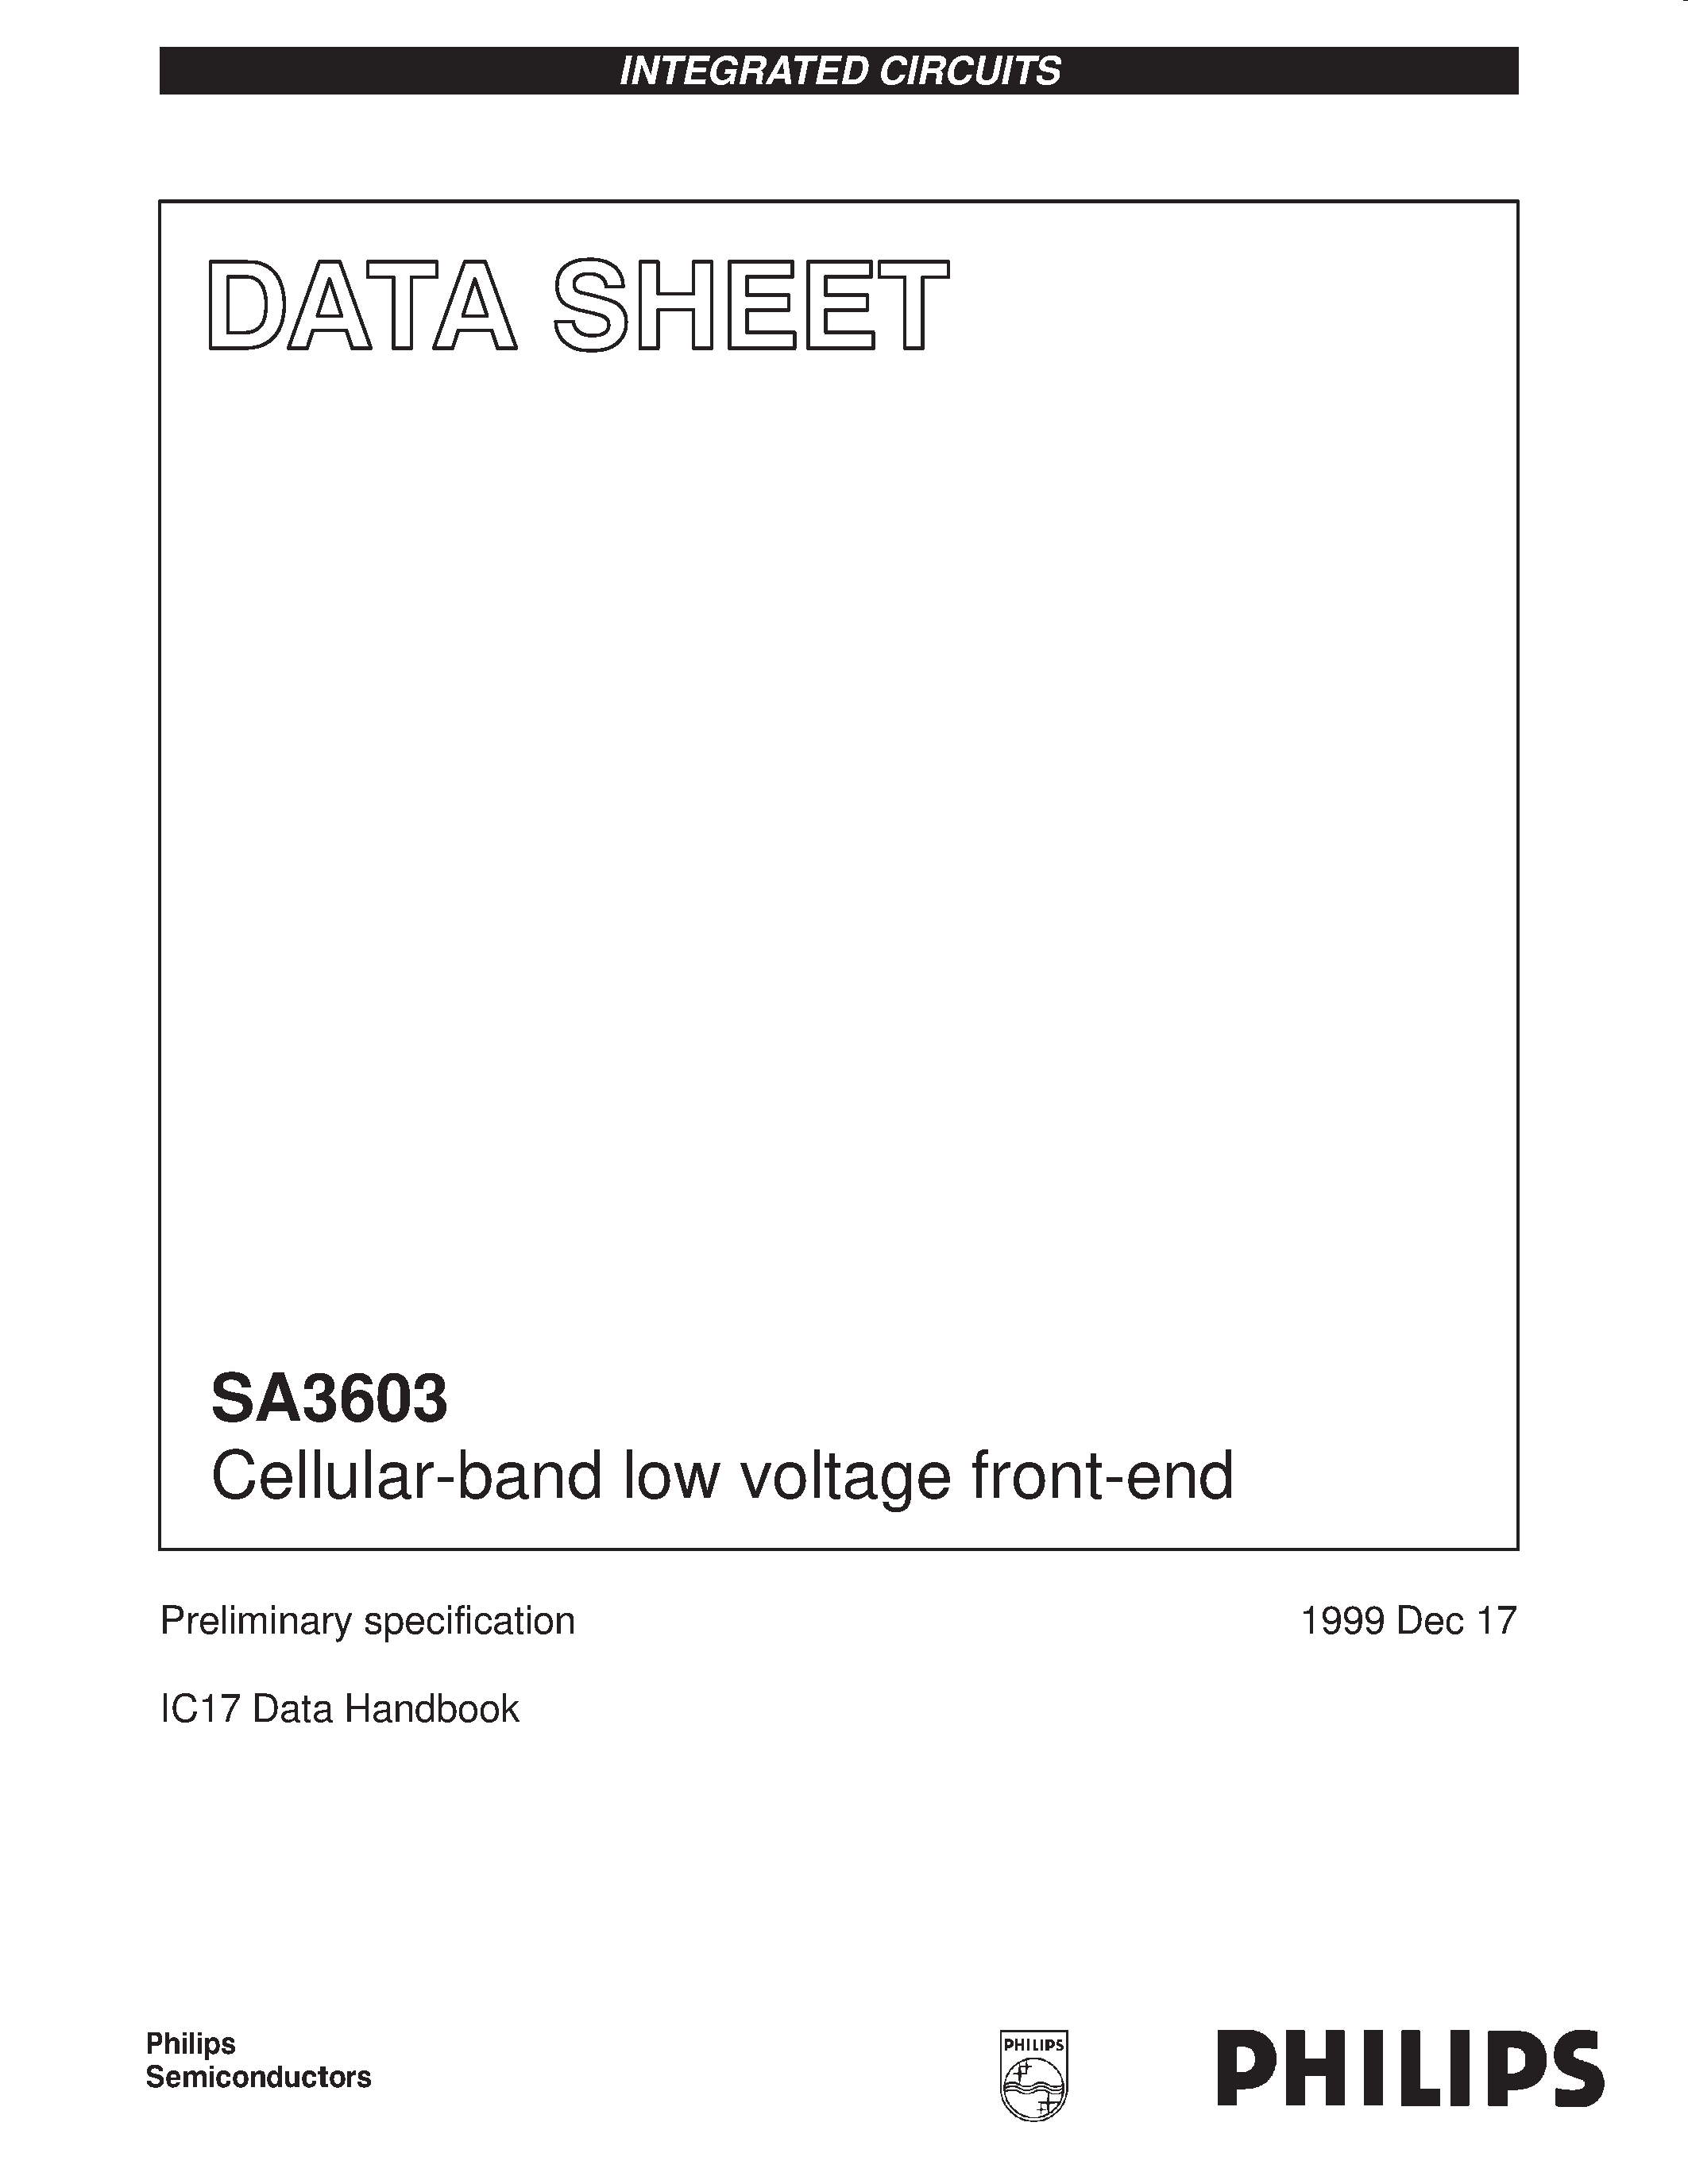 Datasheet SA3603DH - Cellular-band low voltage front-end page 1